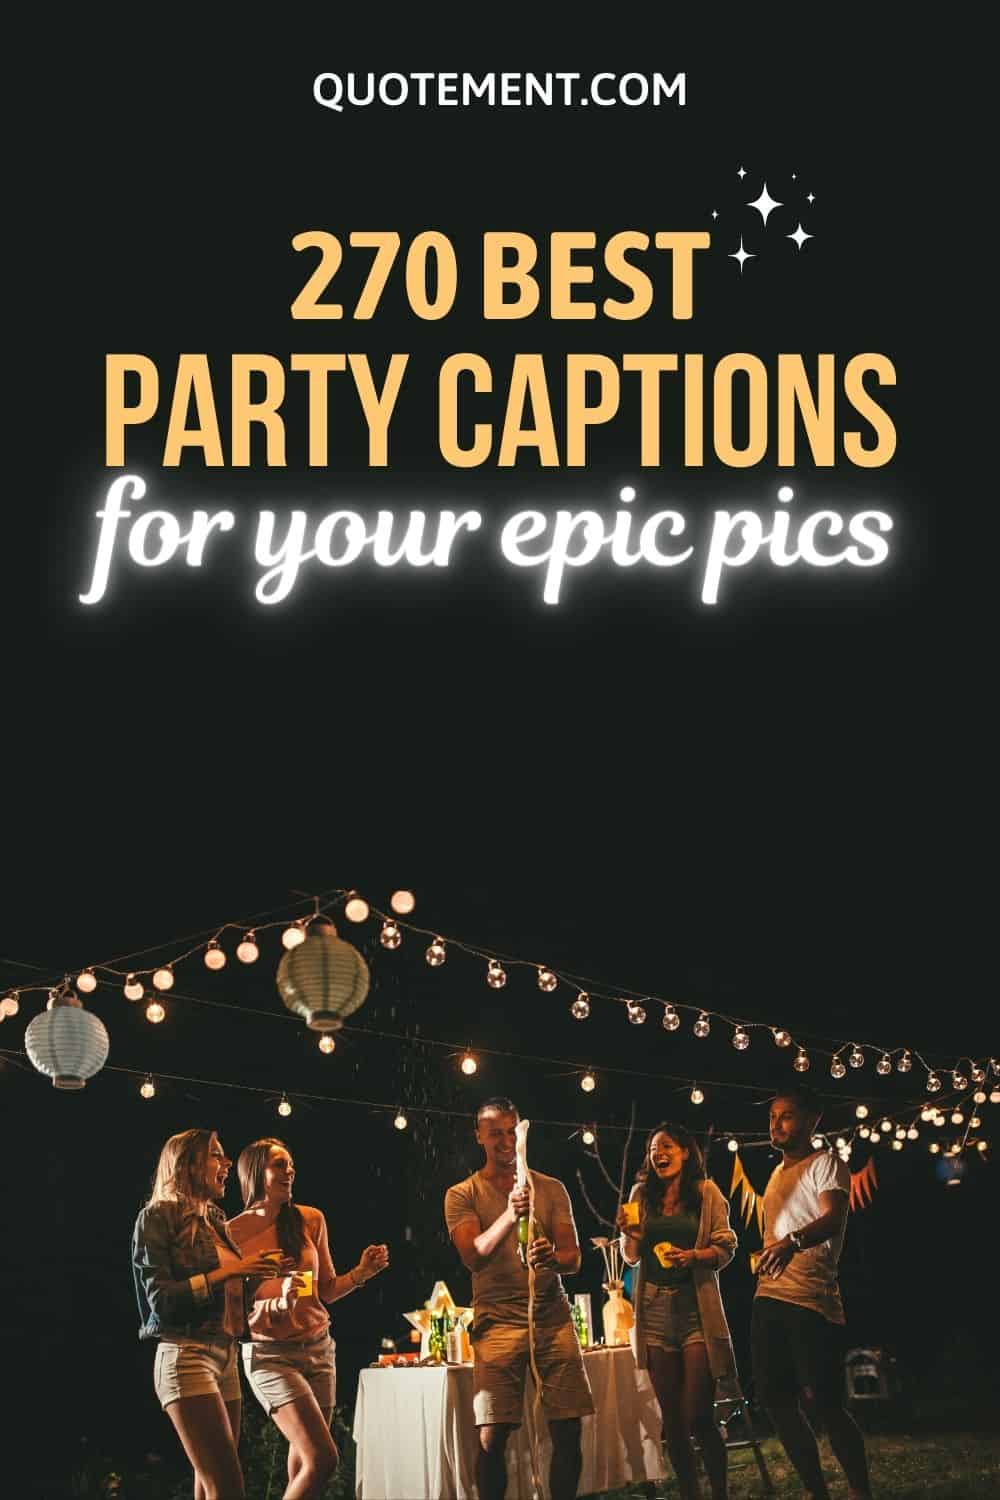 Top 270 Party Captions To Get The Party Started